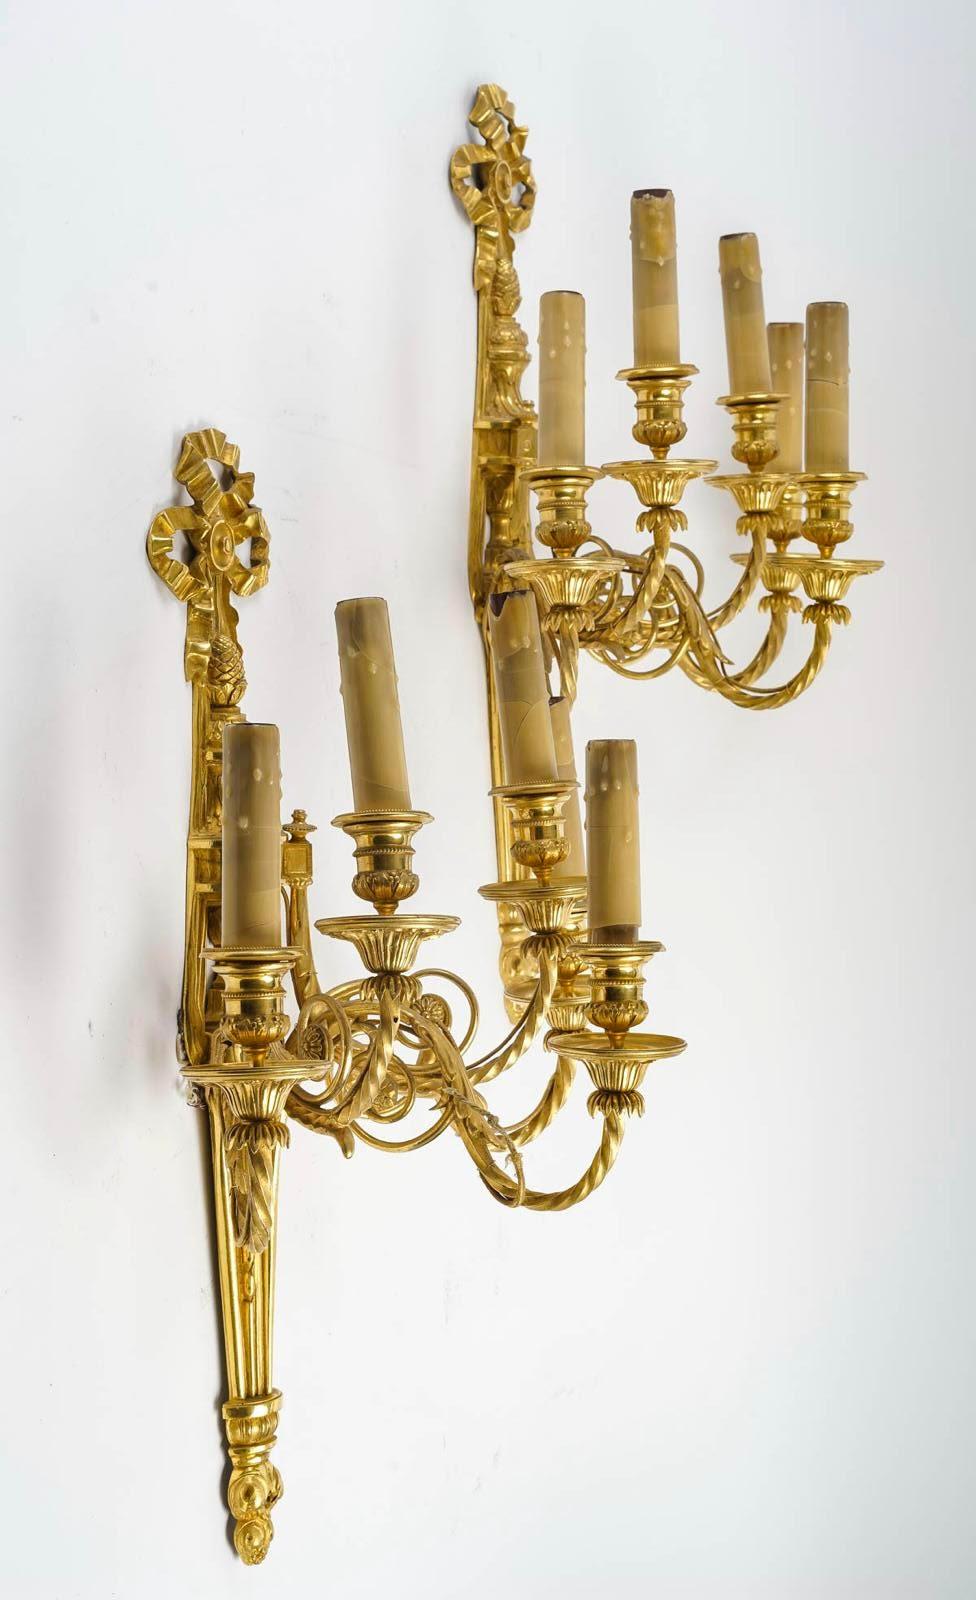 Pair of Louis XVI style wall lights in chased and gilt bronze.

Pair of Louis XVI style wall lights in chased and gilt bronze, 5 arms.
W: 40cm, H: 60cm, D: 26cm